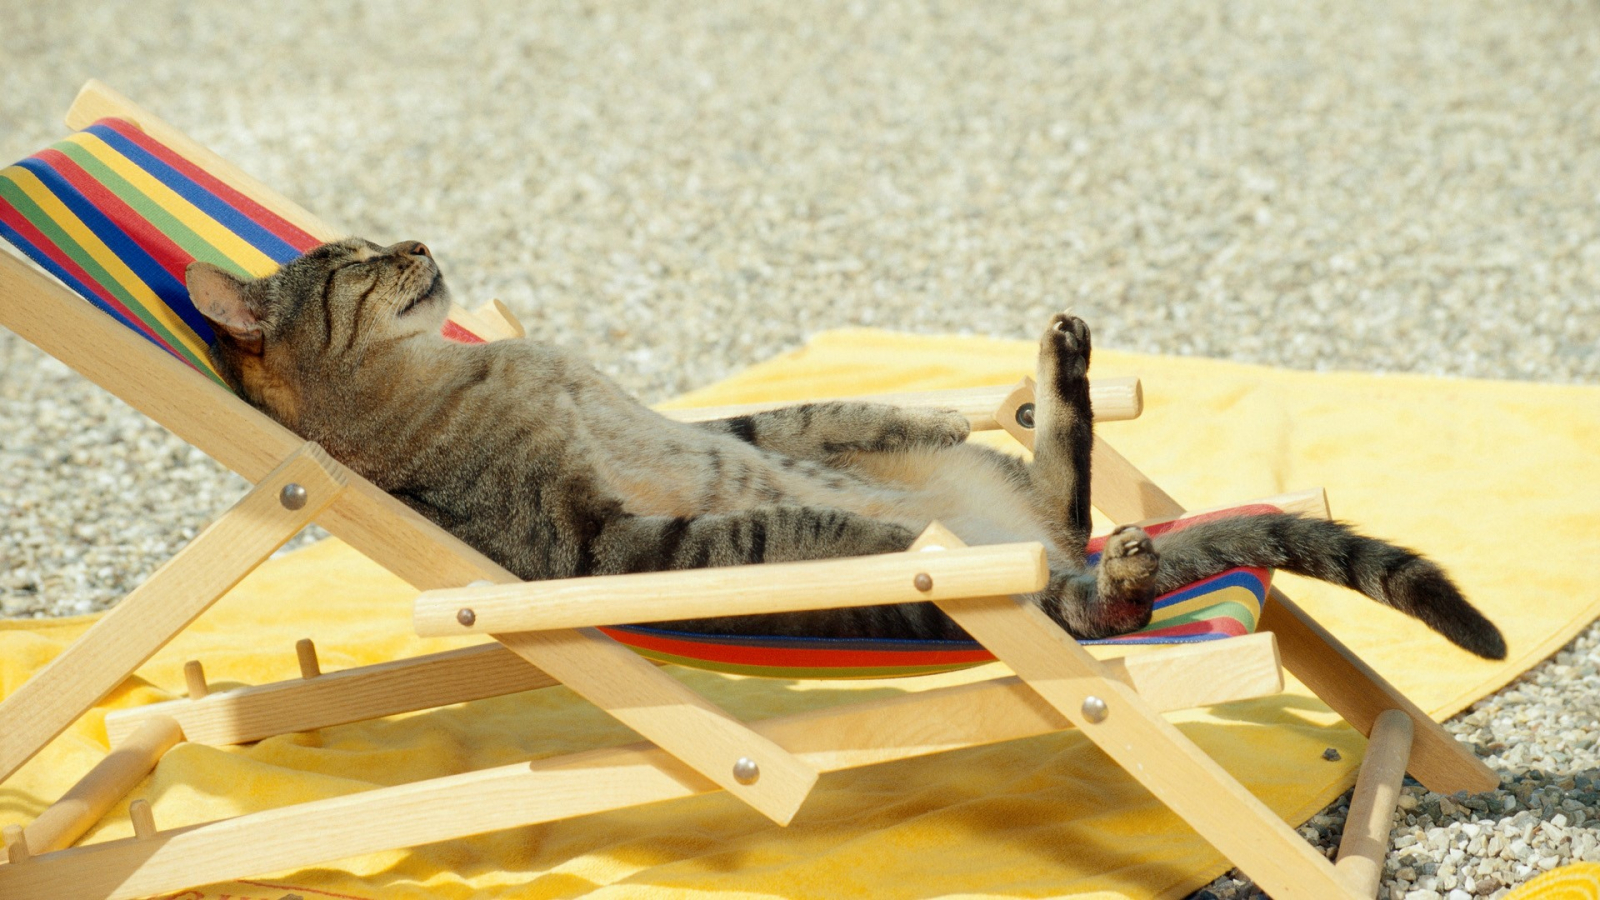 Free download Funny Cat Sleeping on Beach Chair Photo HD Wallpaper [1920x1080] for your Desktop, Mobile & Tablet. Explore Beach Chair Desktop Wallpaper. Summer Beach Chairs Desktop Wallpaper, Adirondack